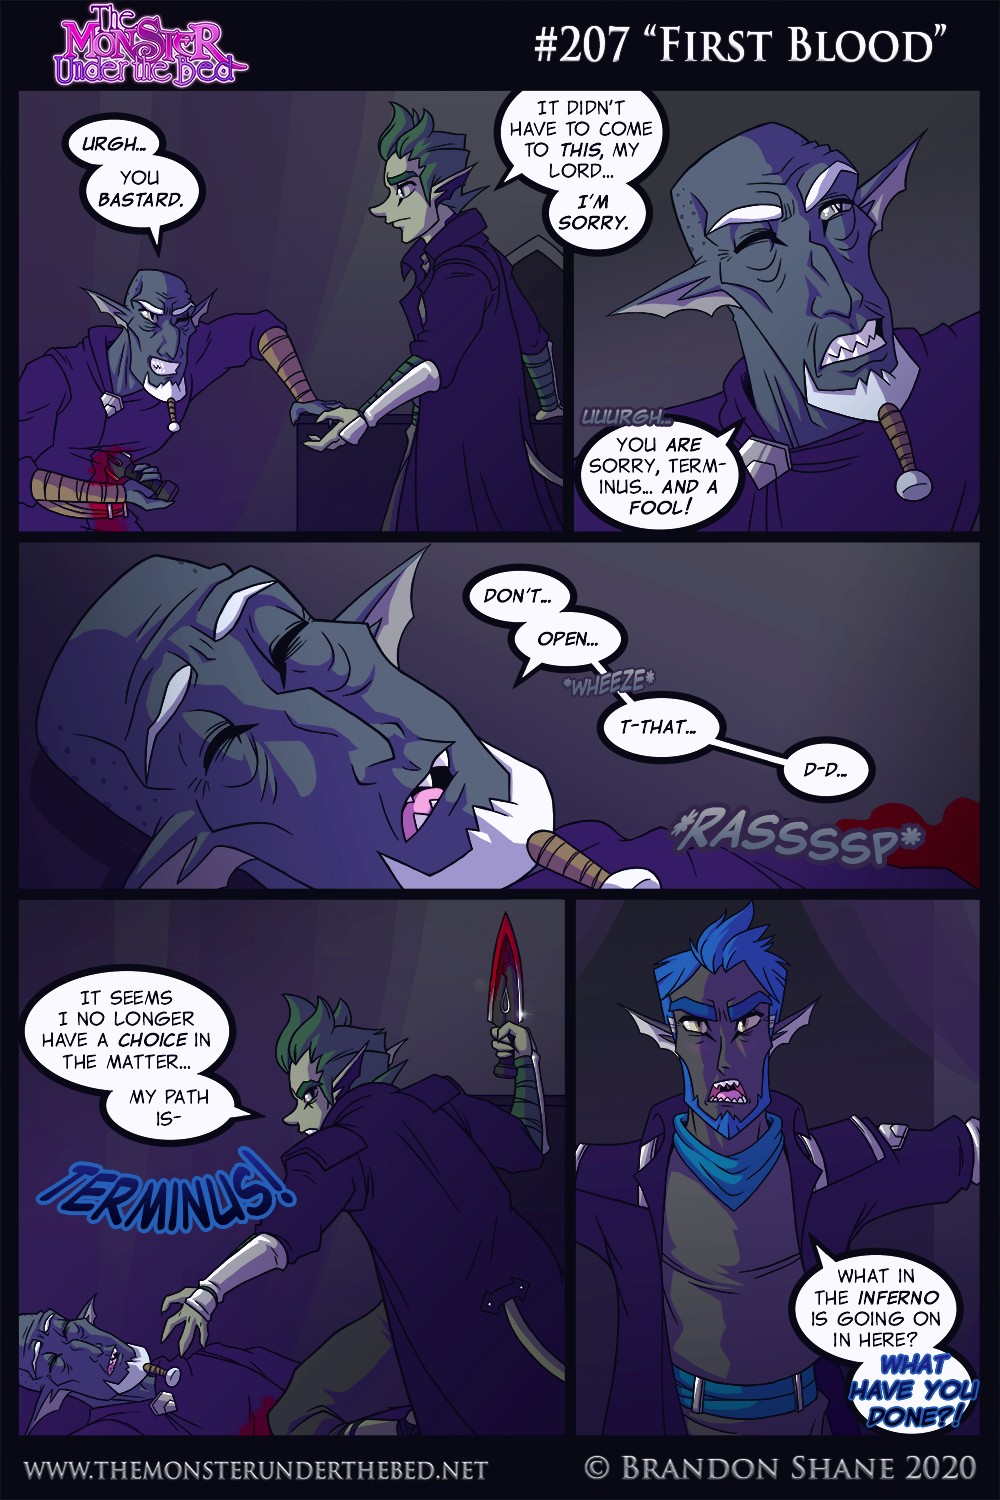 The monster under the bed page 207